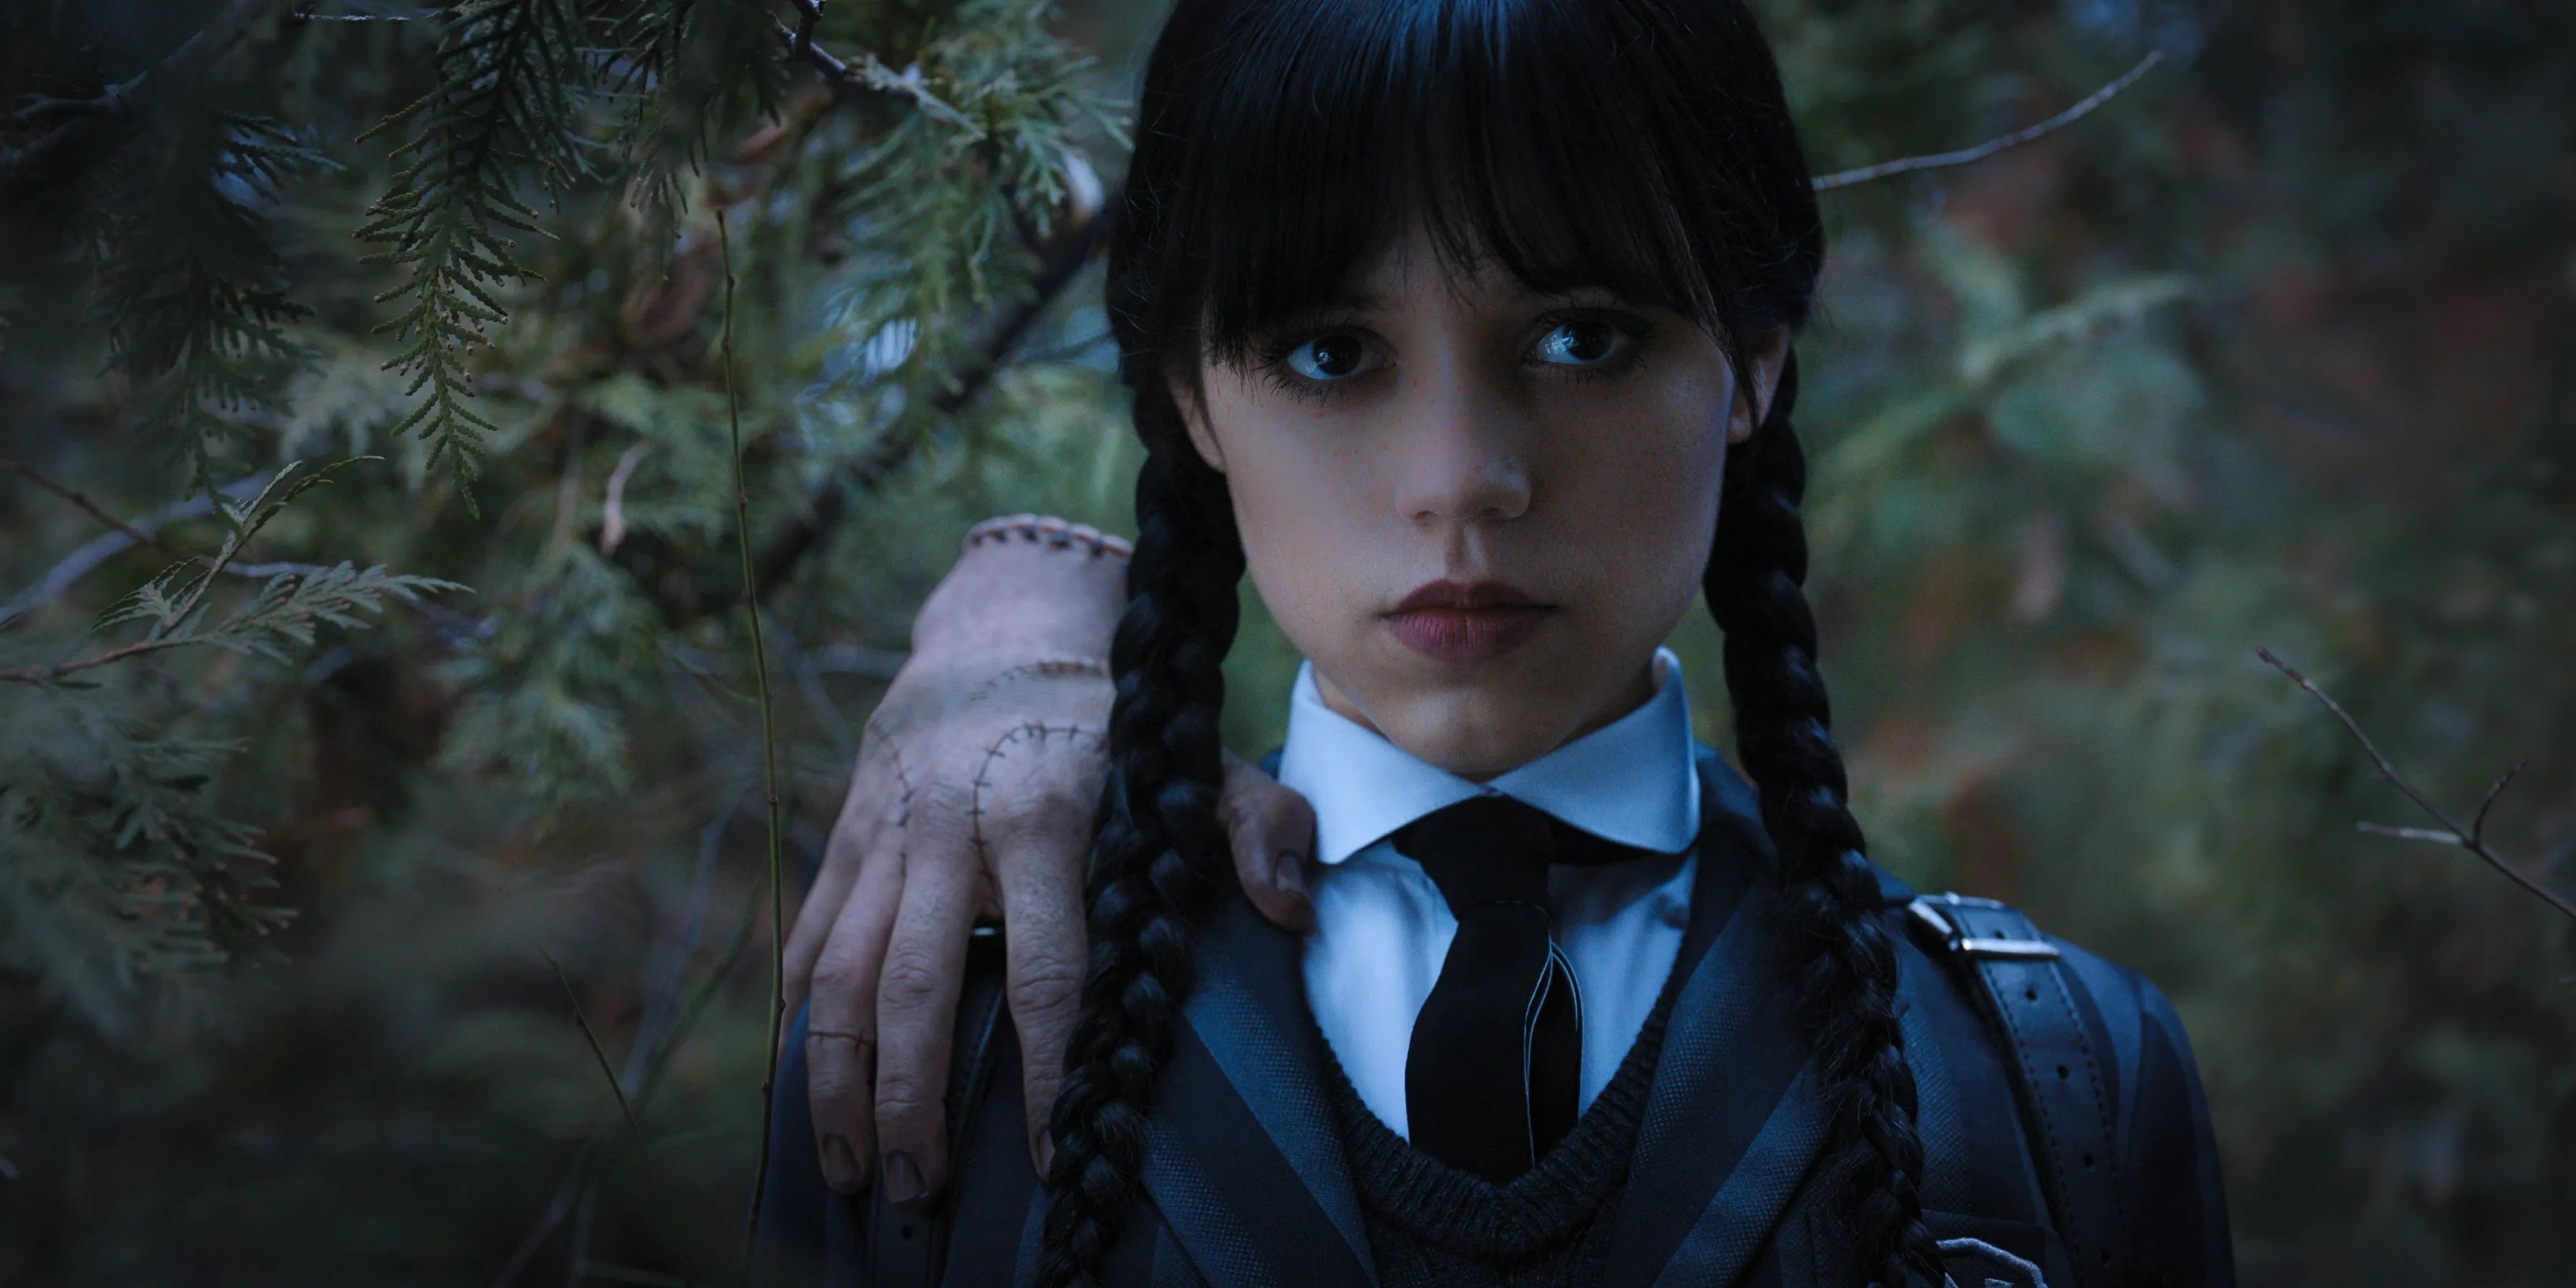 Jenna_Ortega_as_Wednesday_Addams_with_Thing_on_her_shoulder